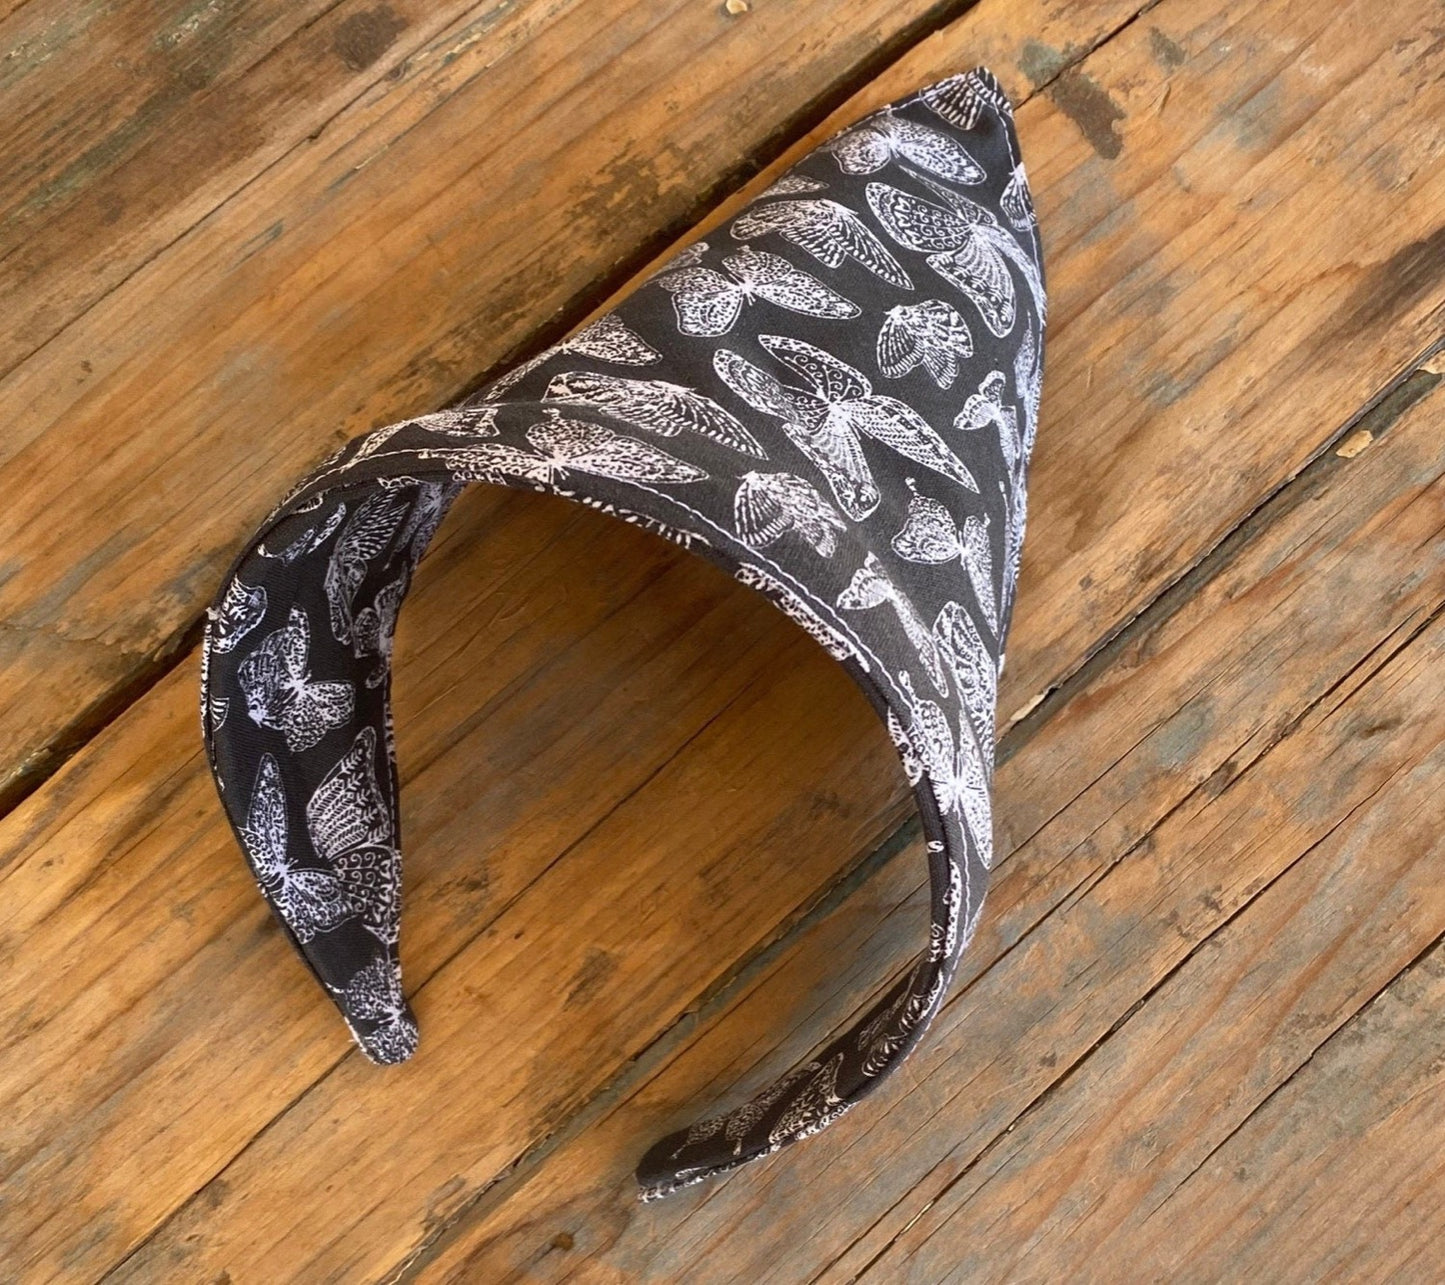 No Tie head scarf design that features a butterfly print. butterflies are white outlines and the background is a charcoal grey.